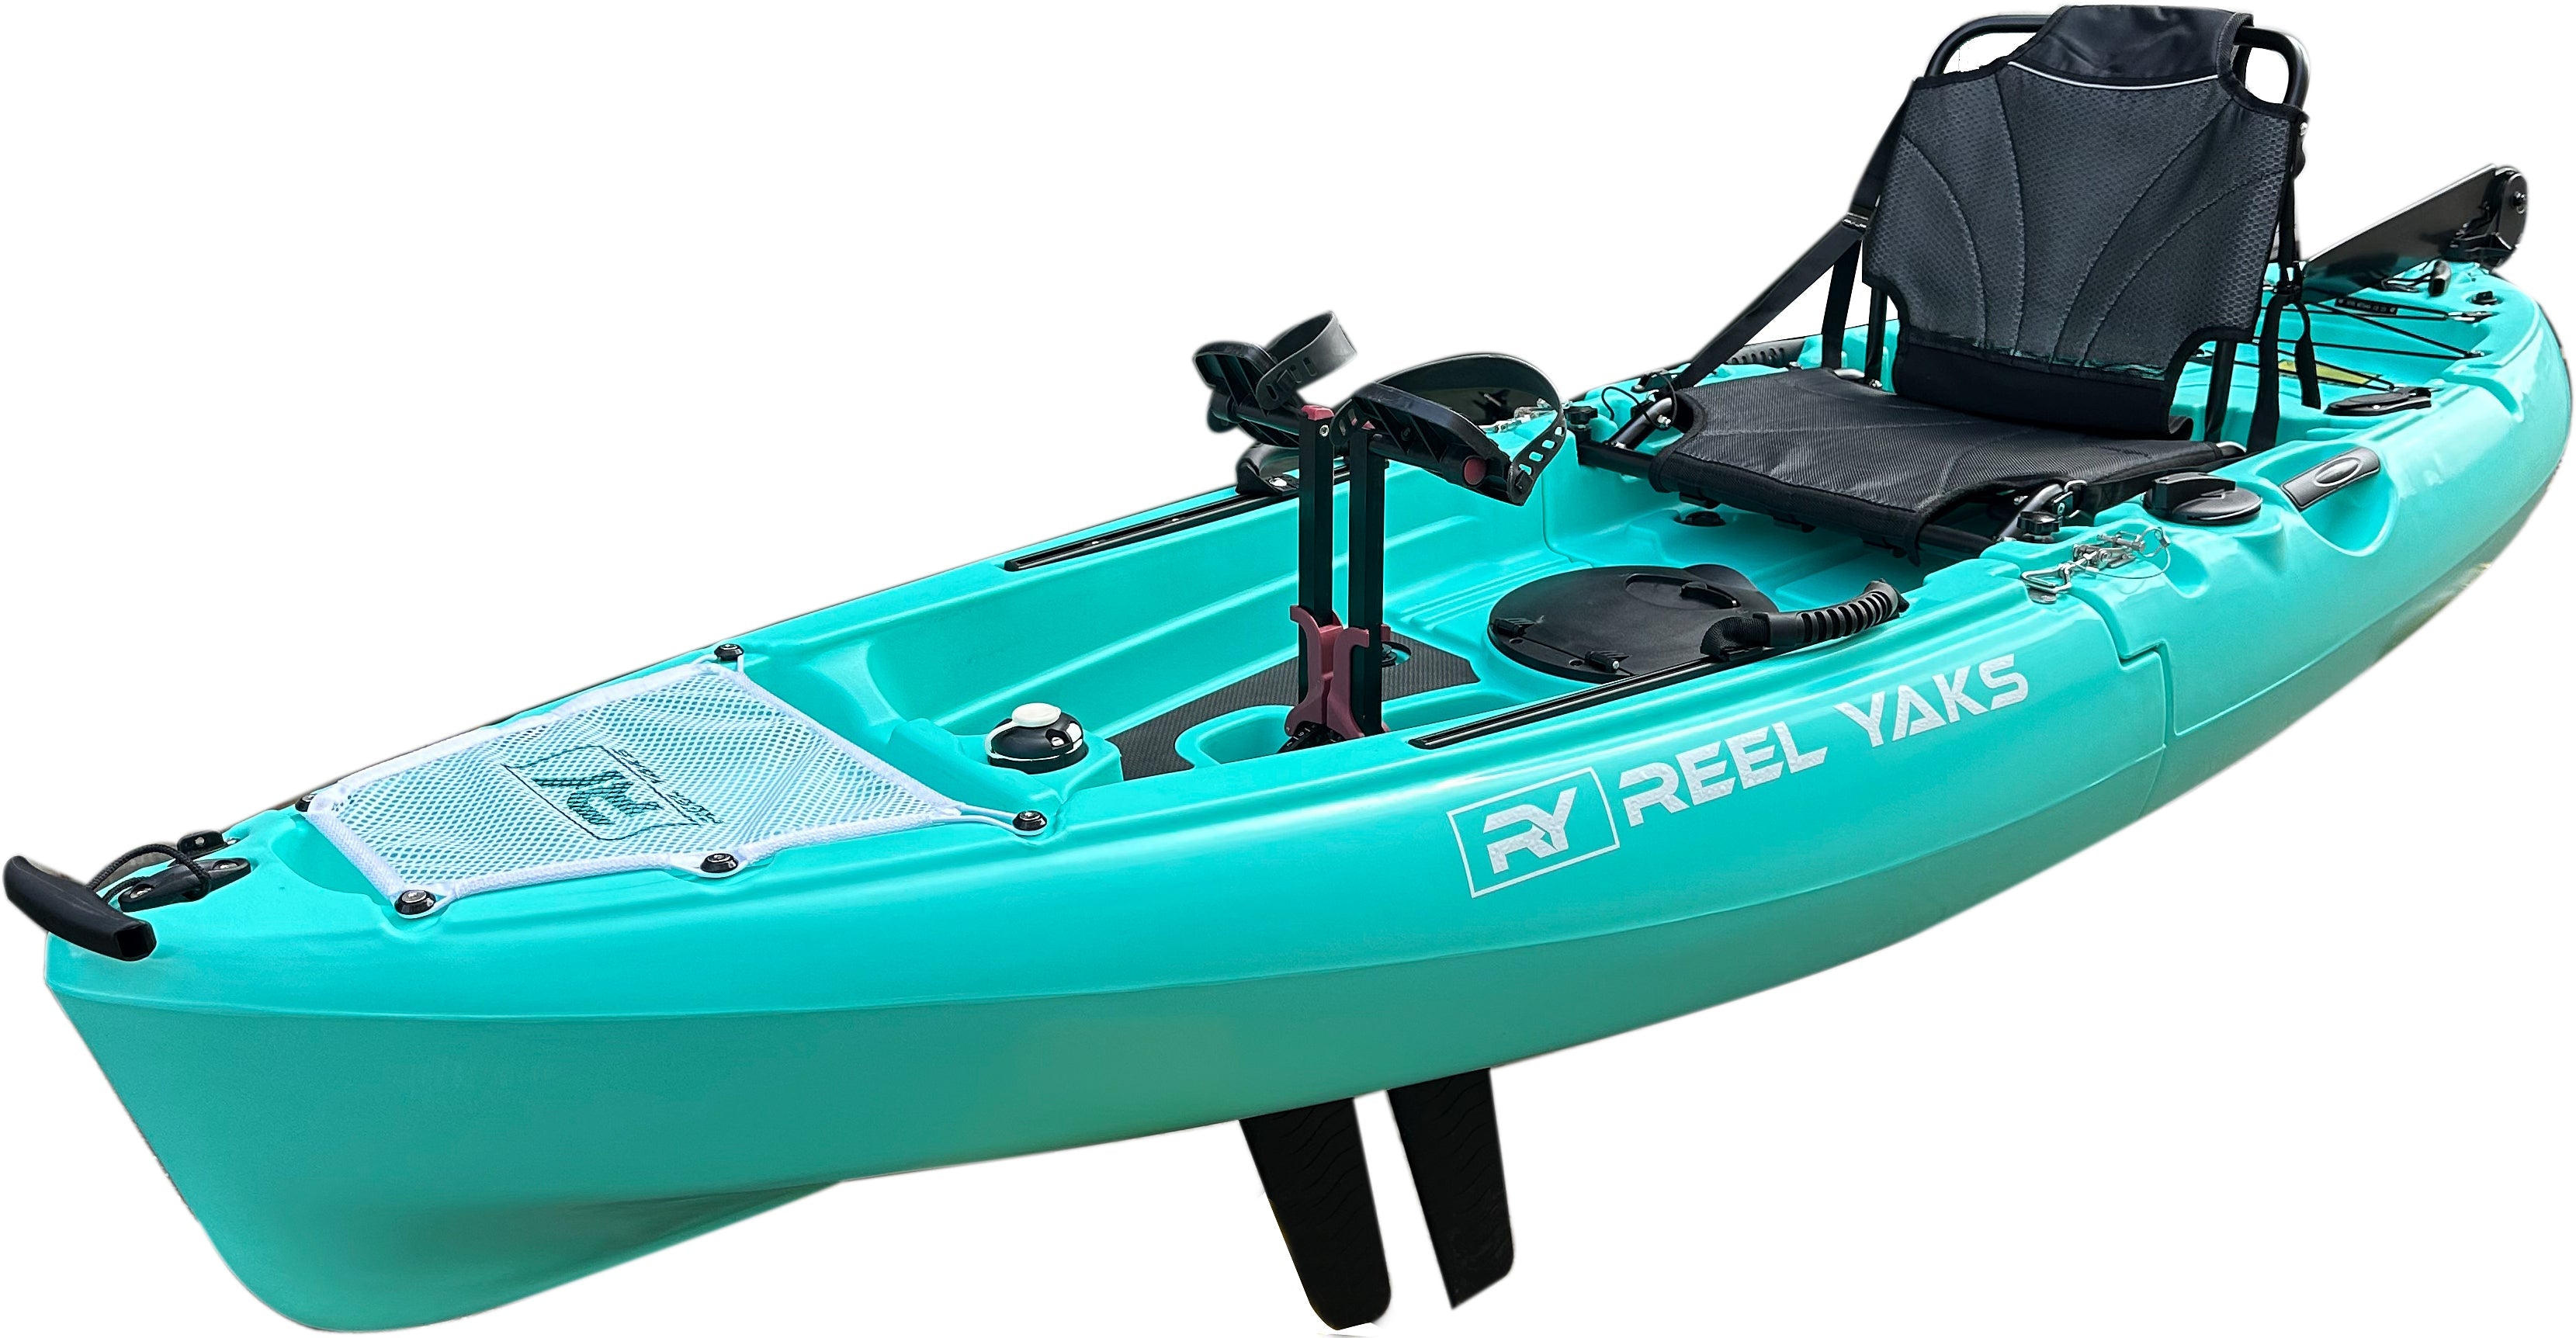 9.5ft Modular Raptor Pedal Fishing Kayak | Fin Drive | Super Lightweight, 400lbs Capacity | Easy to Store - Easy to Carry |No roof Racks - No Wall Racks | Adults Youths Kids